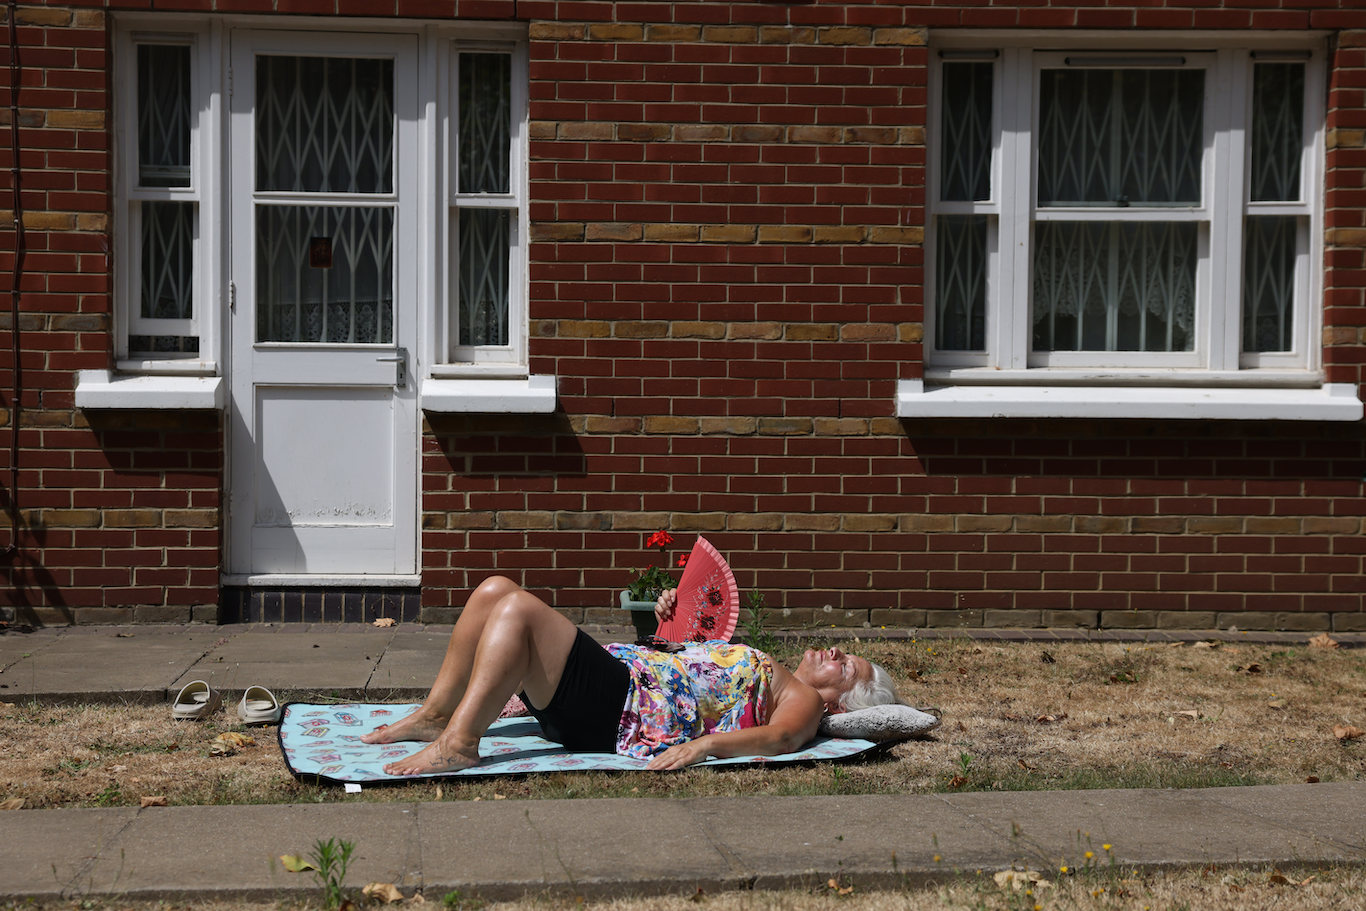 A woman lies on a towel with a handheld fan outside her home in Hackney, London